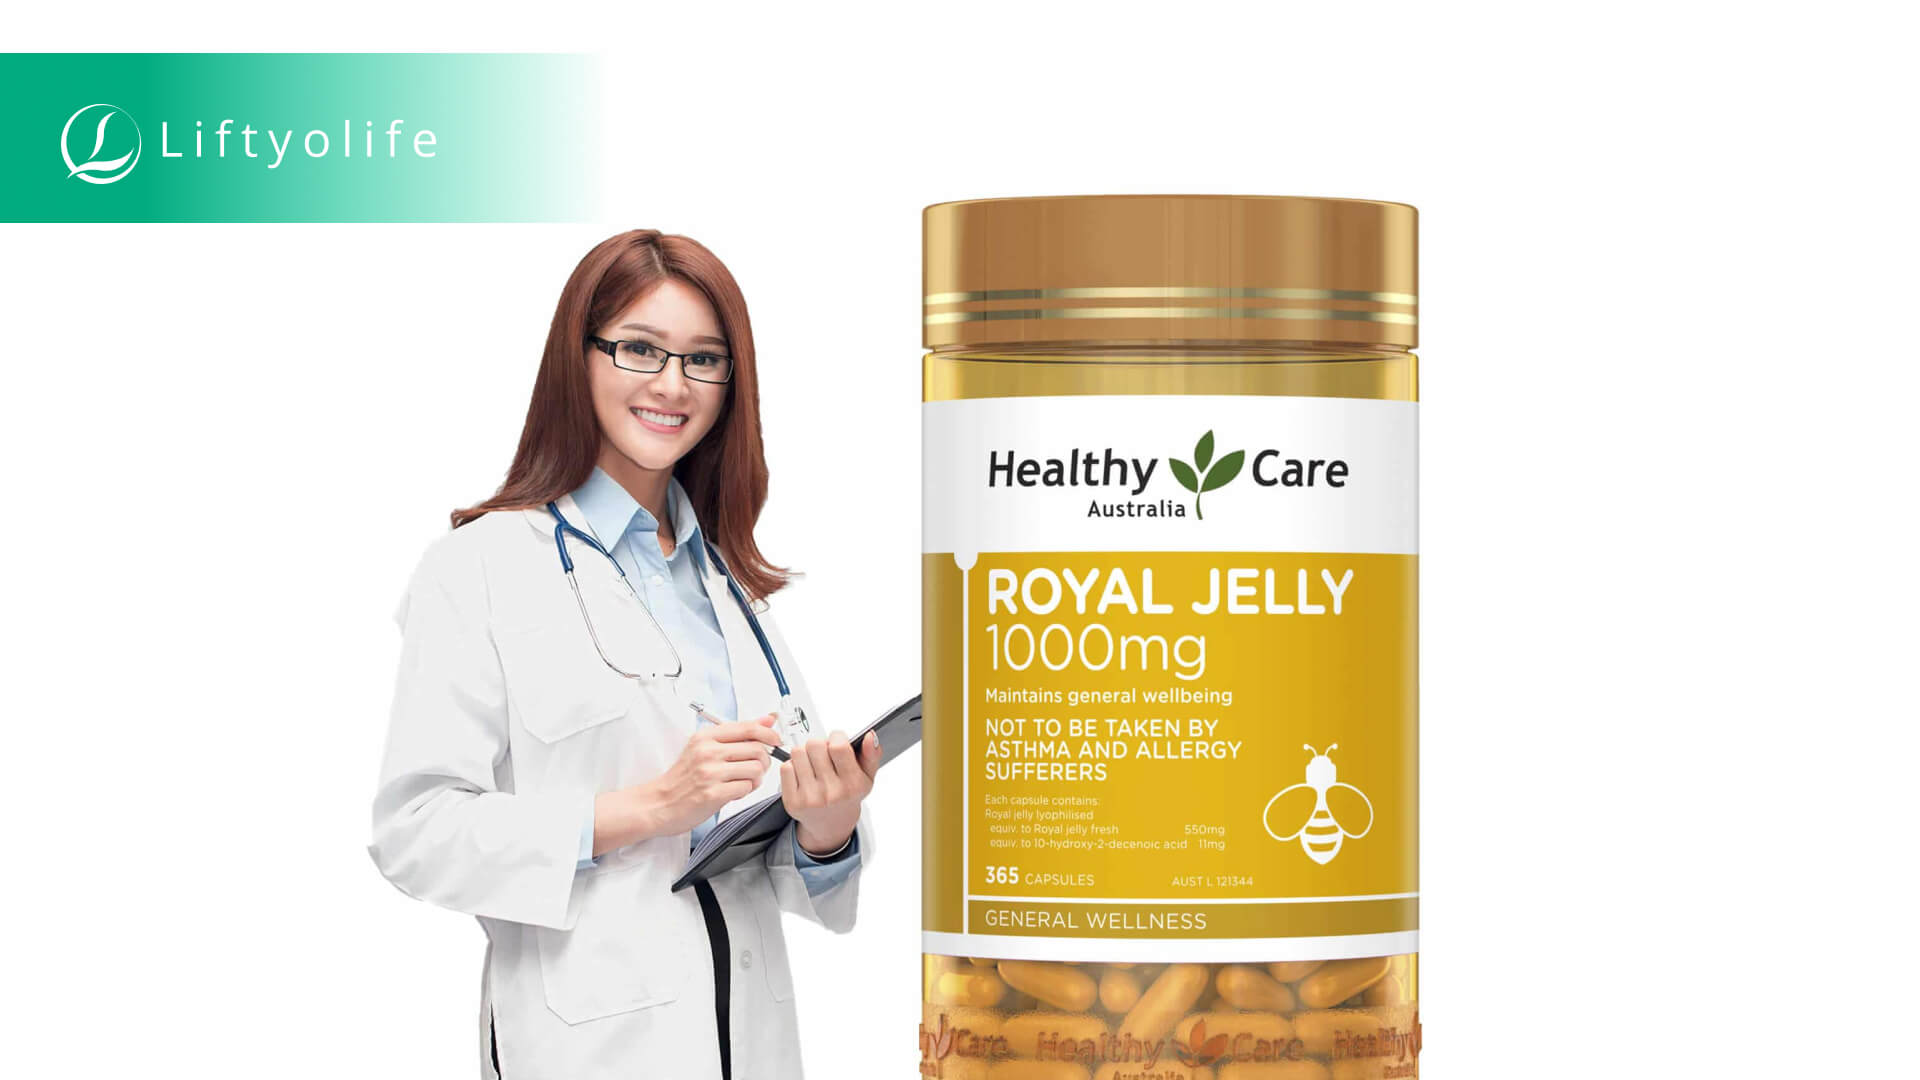 Royal Jelly for hormone balance